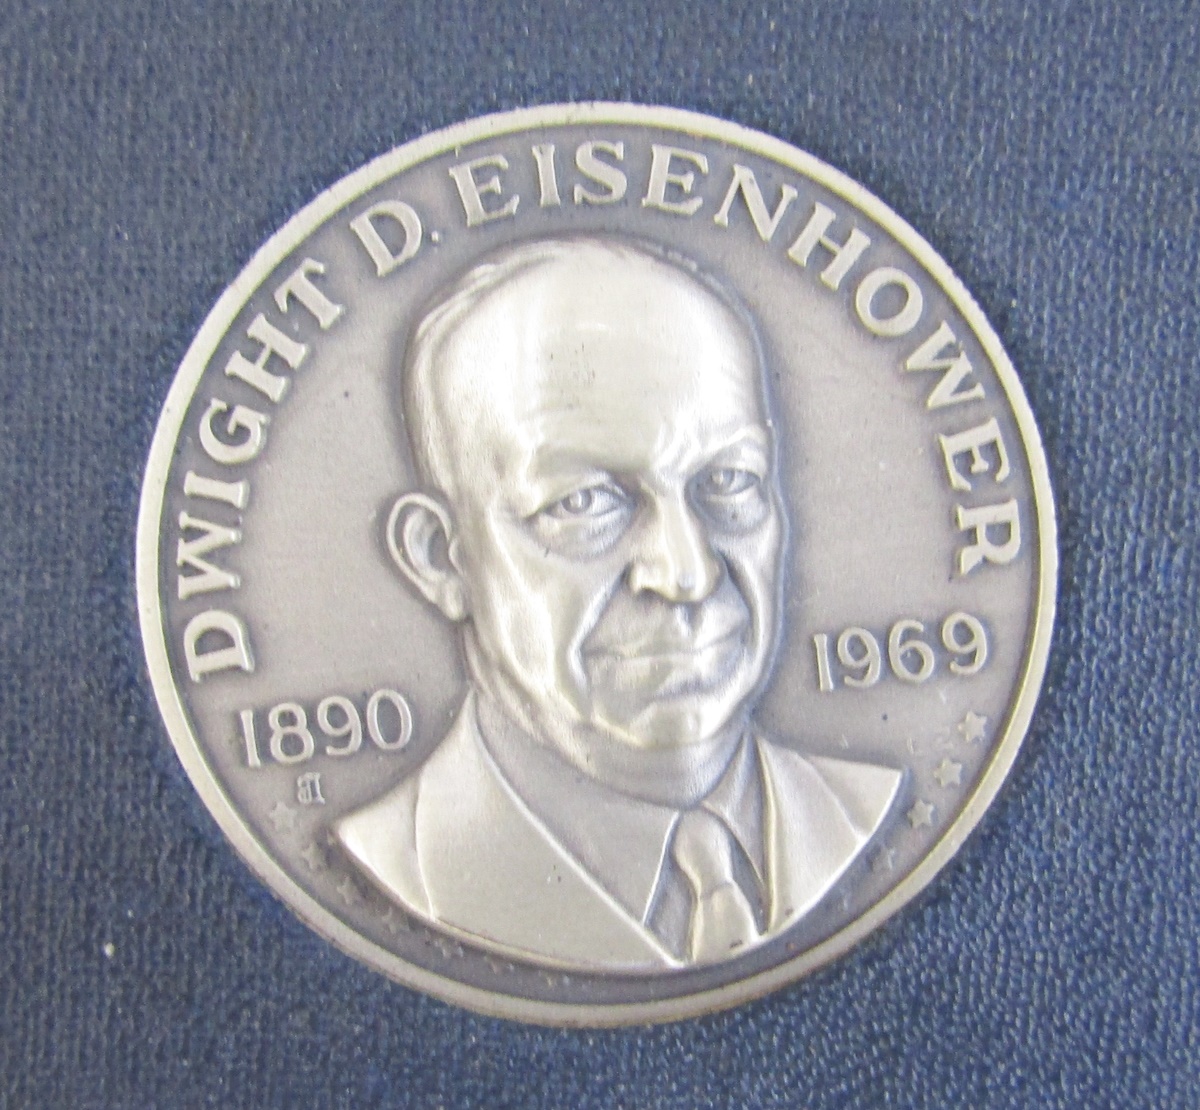 Eisenhower commemorative set made up of silver medallion and 6c postage stamp, and US numismatic - Image 3 of 9